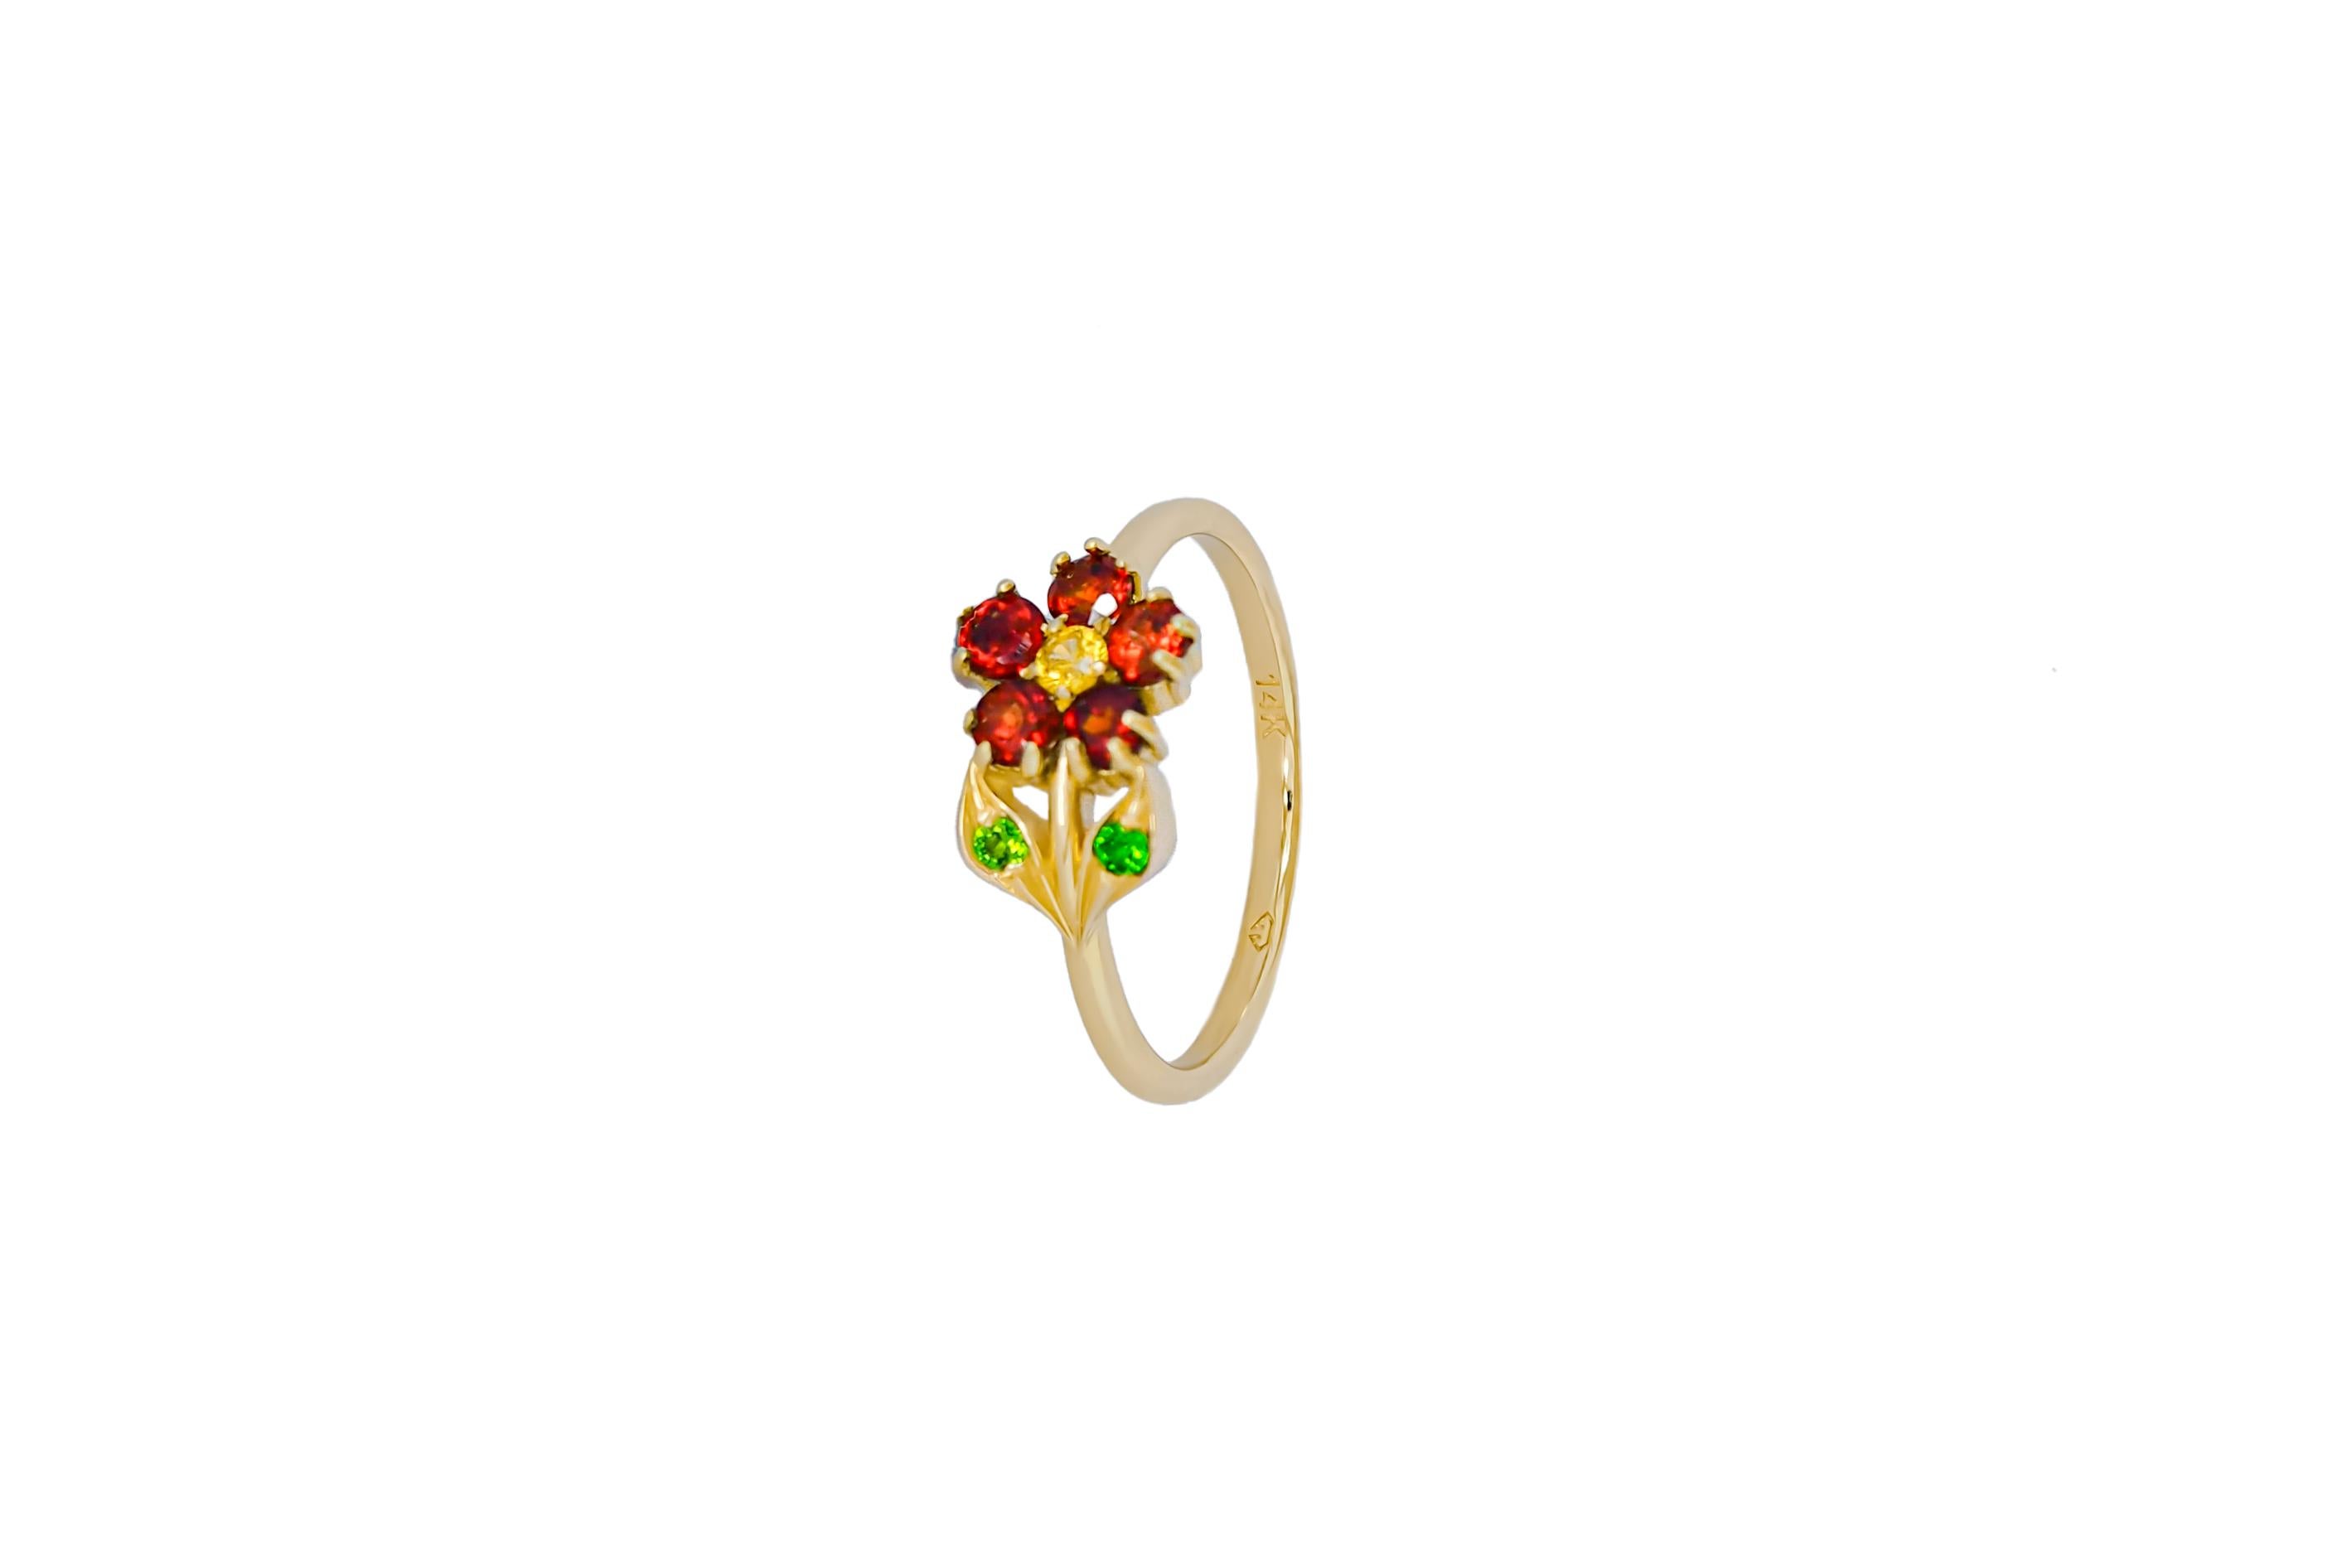 Flower Ring in 14 Karat Gold, Sapphire, Garnet and Chrome Diopsides Ring.  For Sale 4